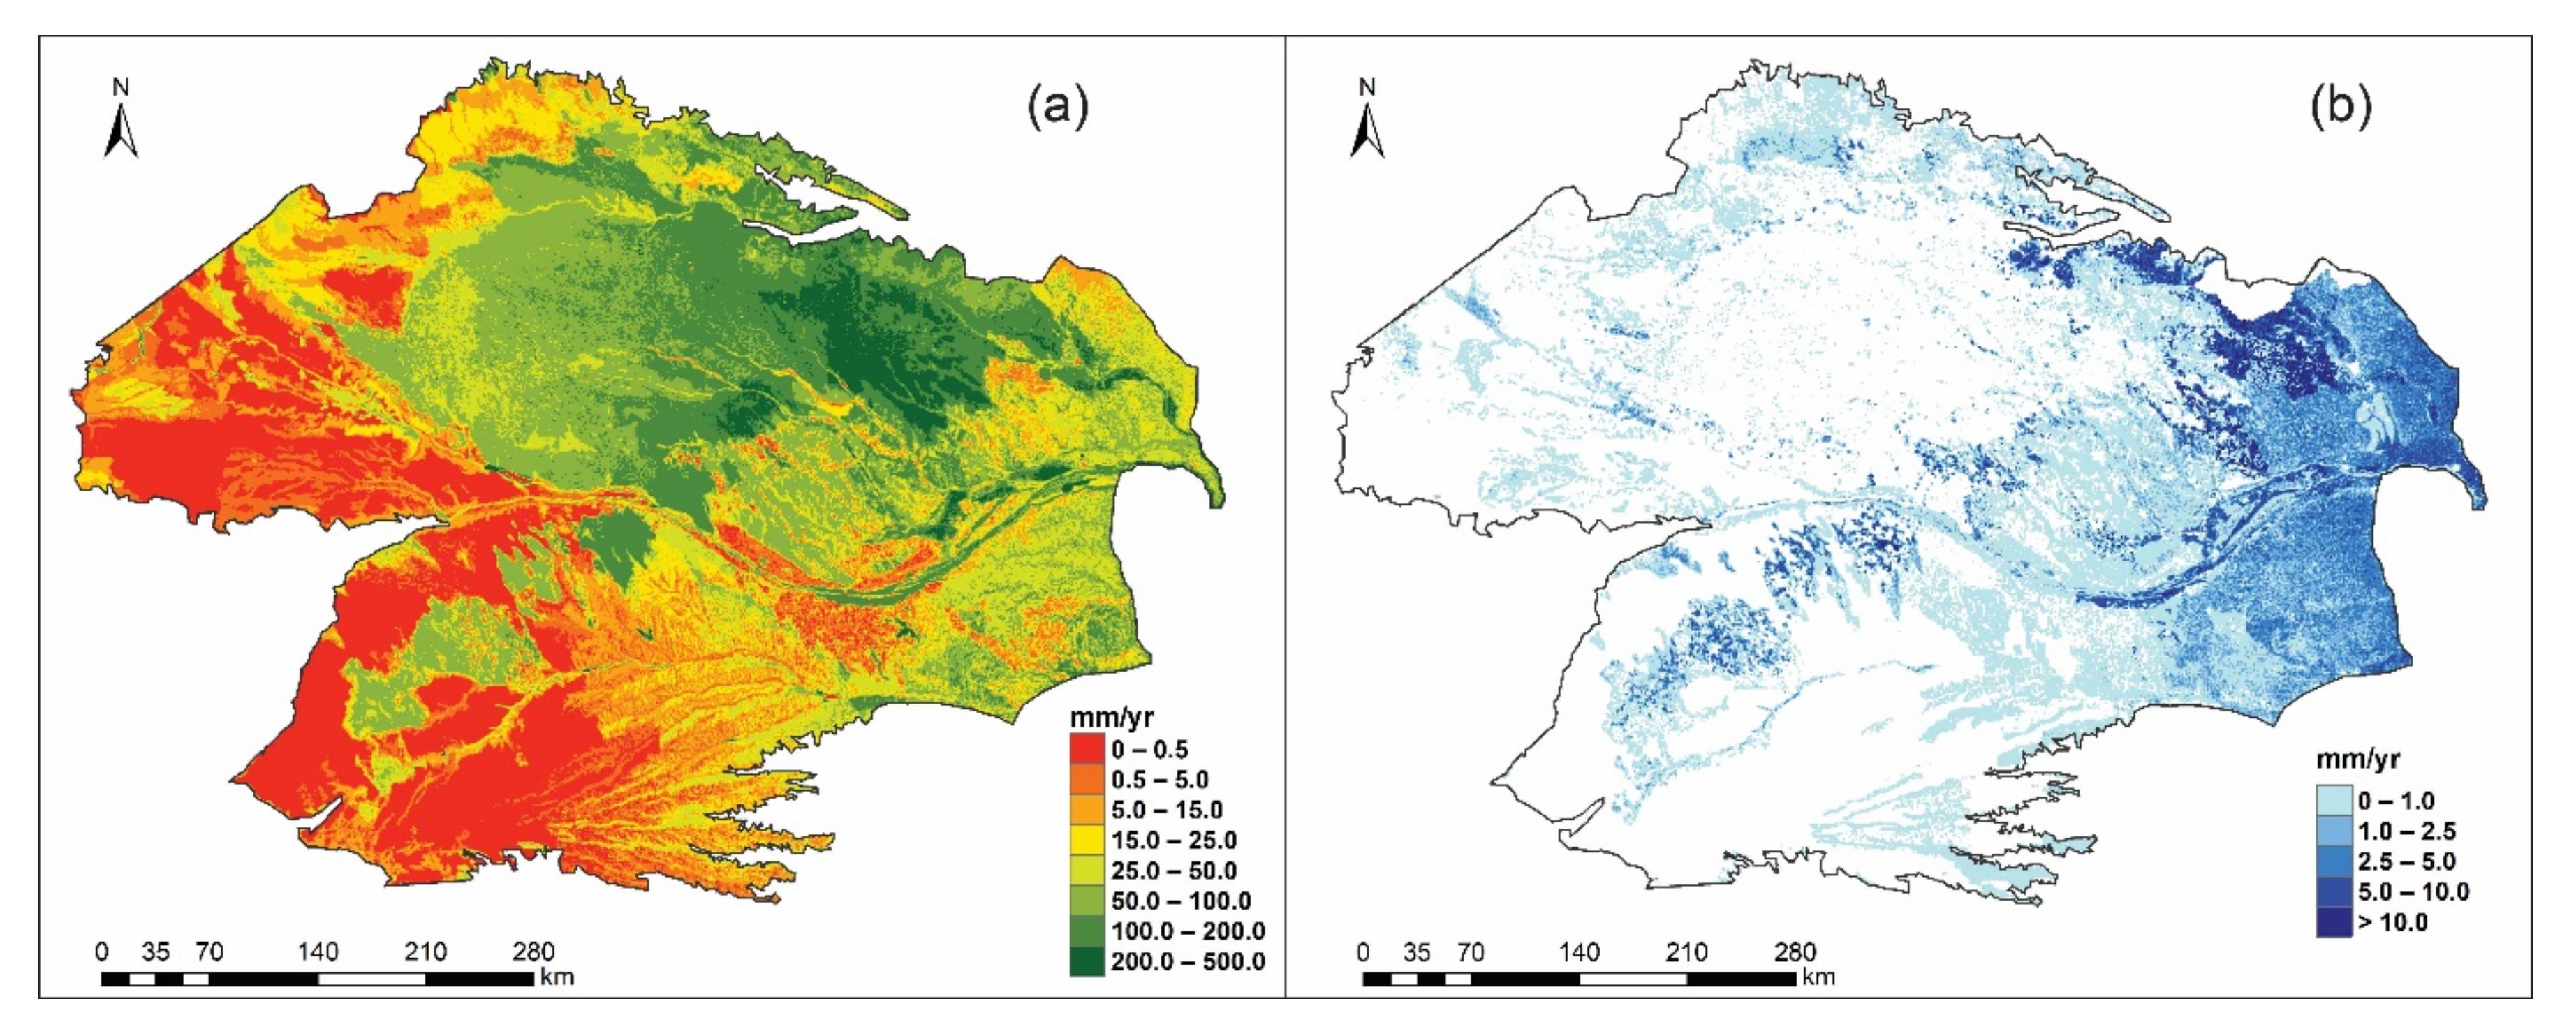 Water | Free Full-Text | Agricultural Irrigation Effects on Hydrological  Processes in the United States Northern High Plains Aquifer Simulated by  the Coupled SWAT-MODFLOW System | HTML